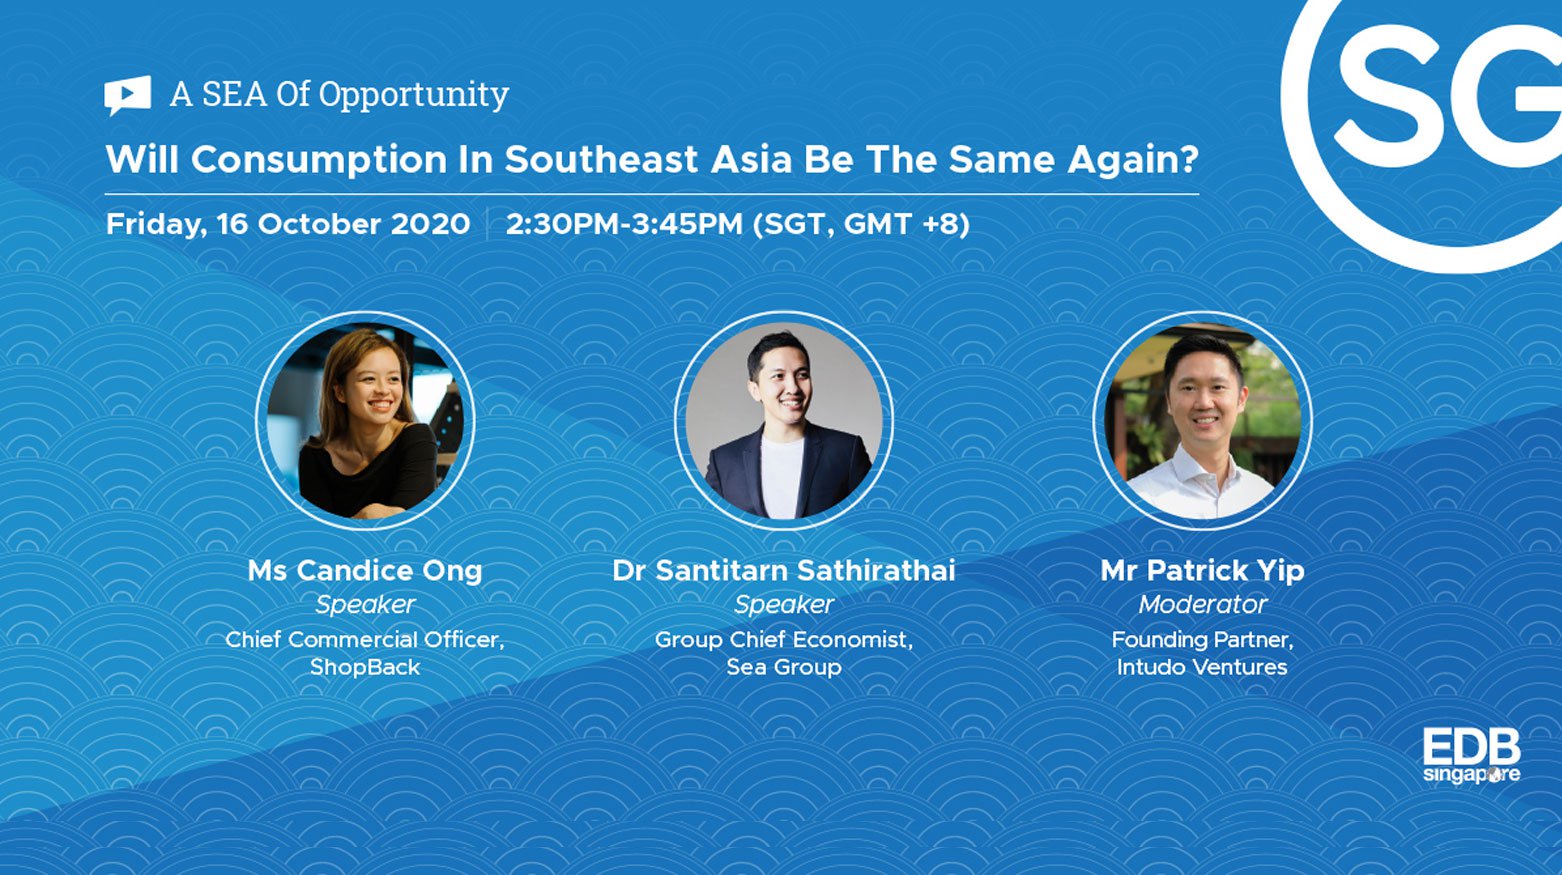 Will Consumption In Southeast Asia Be The Same Again?